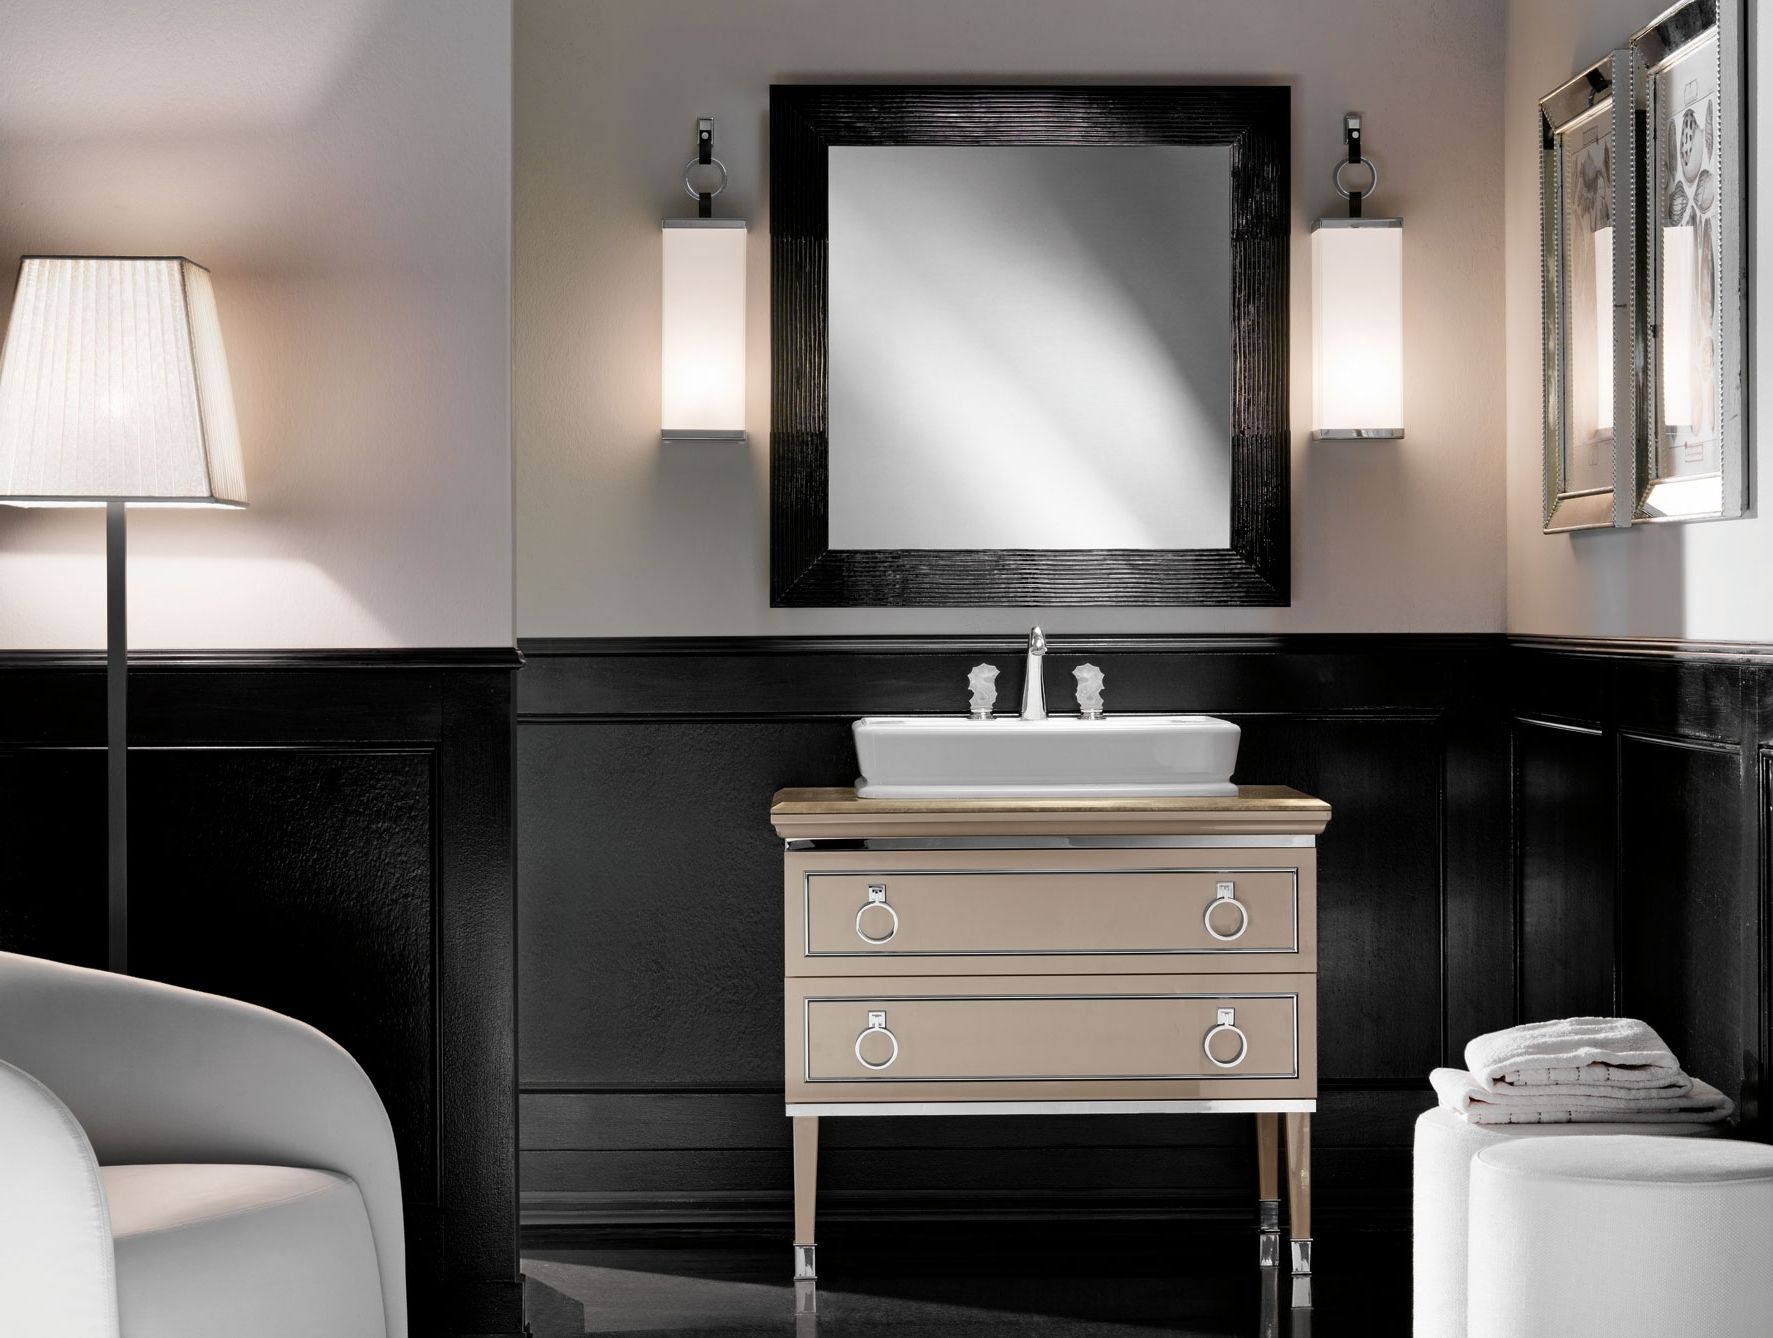 Lutetia L12 Traditional Italian Art Deco Bathroom Vanity Beige Lacquer Within Favorite Modern Italian Wall Art (View 14 of 15)